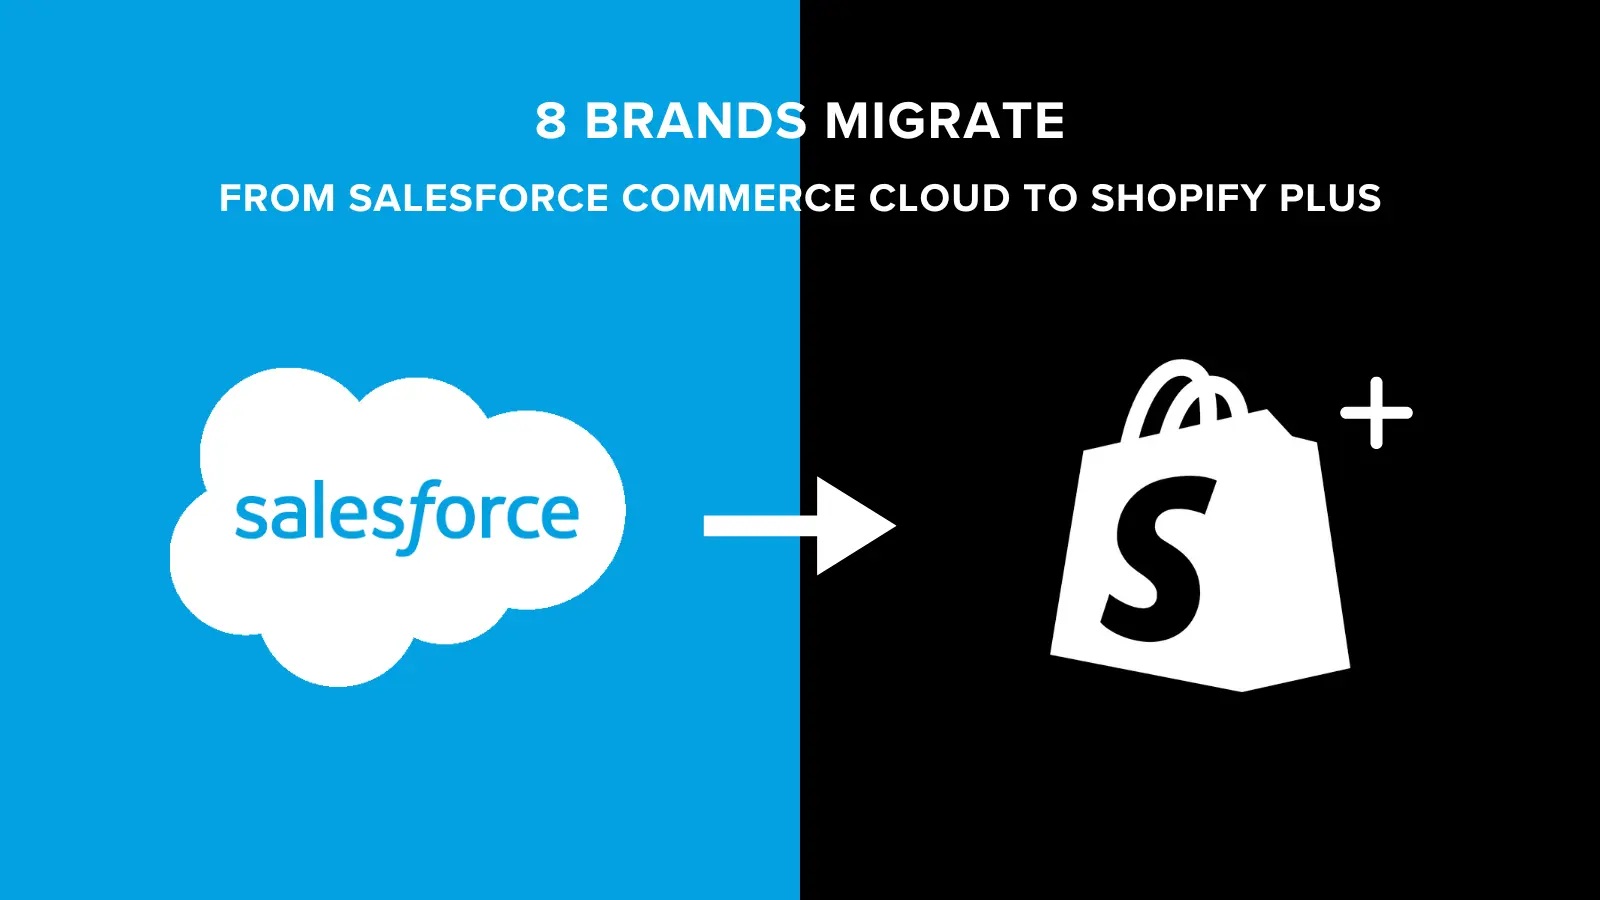 8 Brands Migrate from Salesforce Commerce Cloud to Shopify Plus